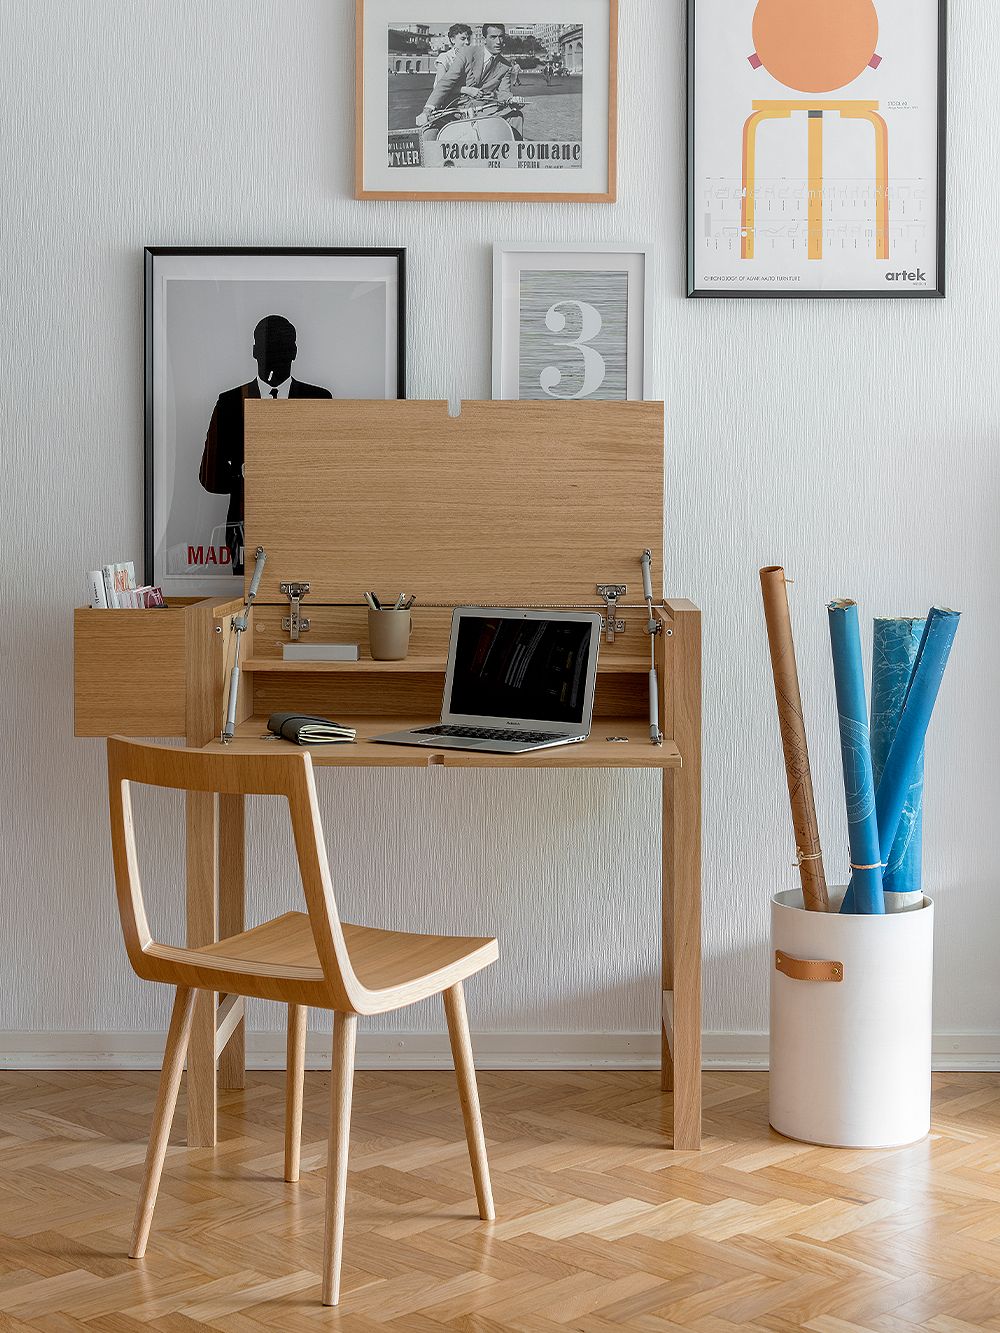 Tapio Anttila's Jat-ko desk opened with a laptop and various office supplies inside. In front of the desk is a wooden Viiva chair.